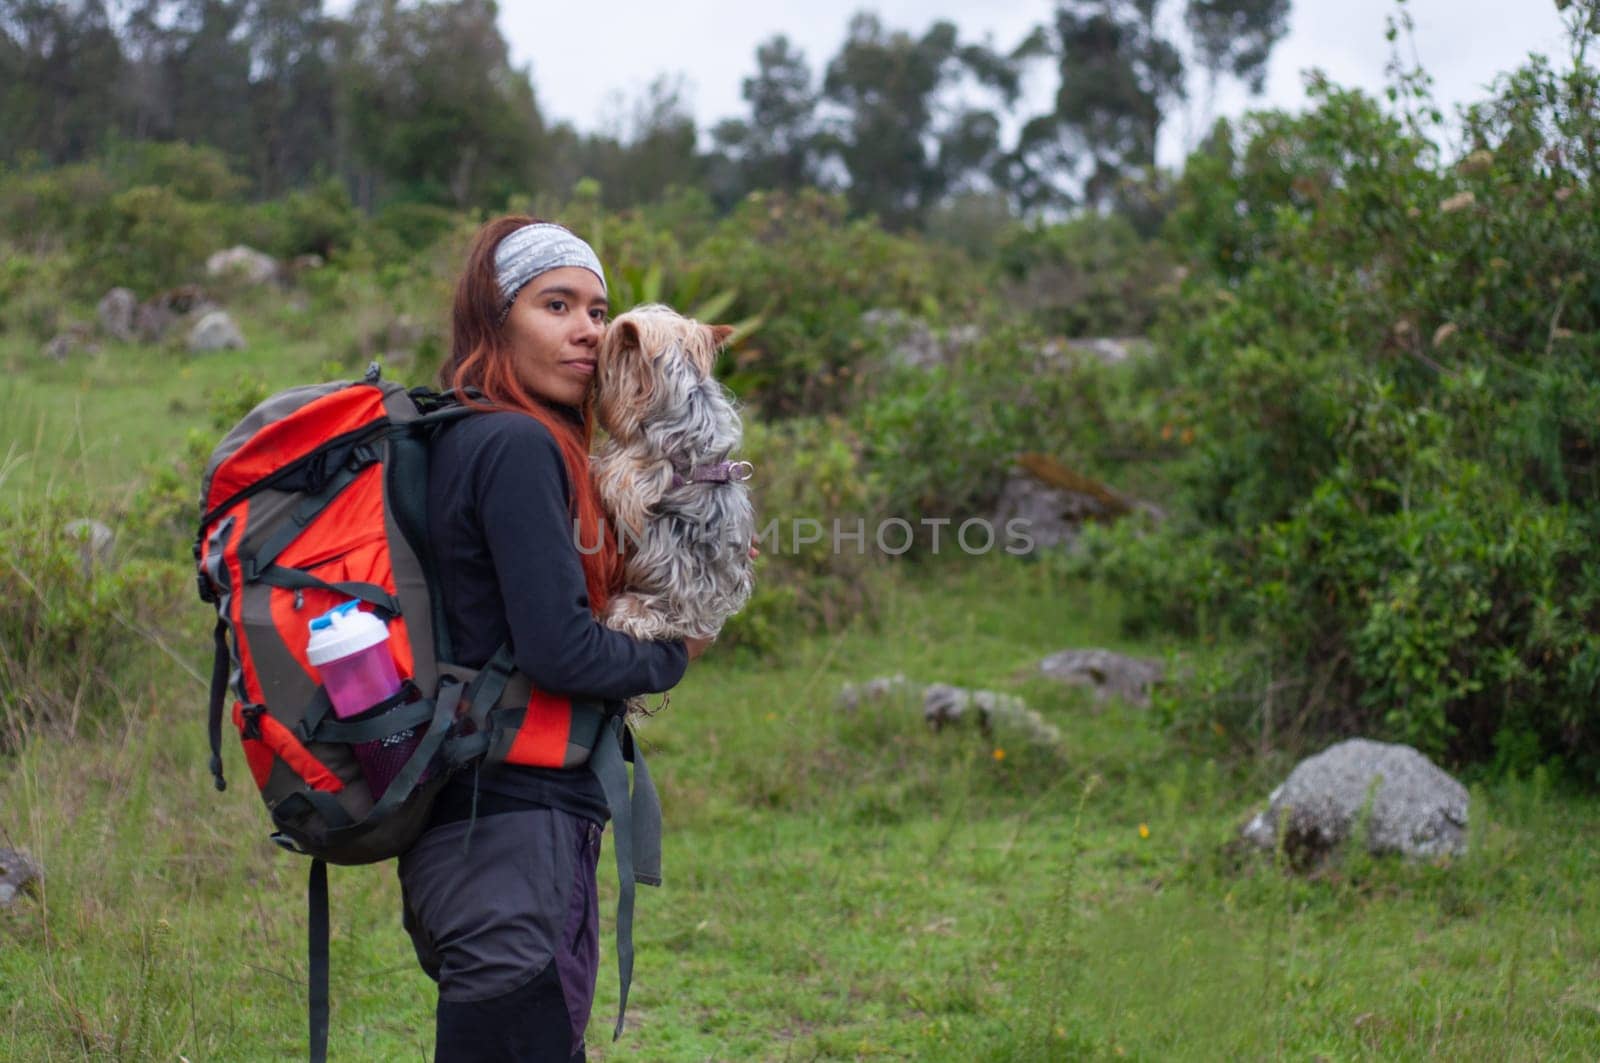 copy space mountain travel lover woman looking at camera with her dog in her arms by Raulmartin